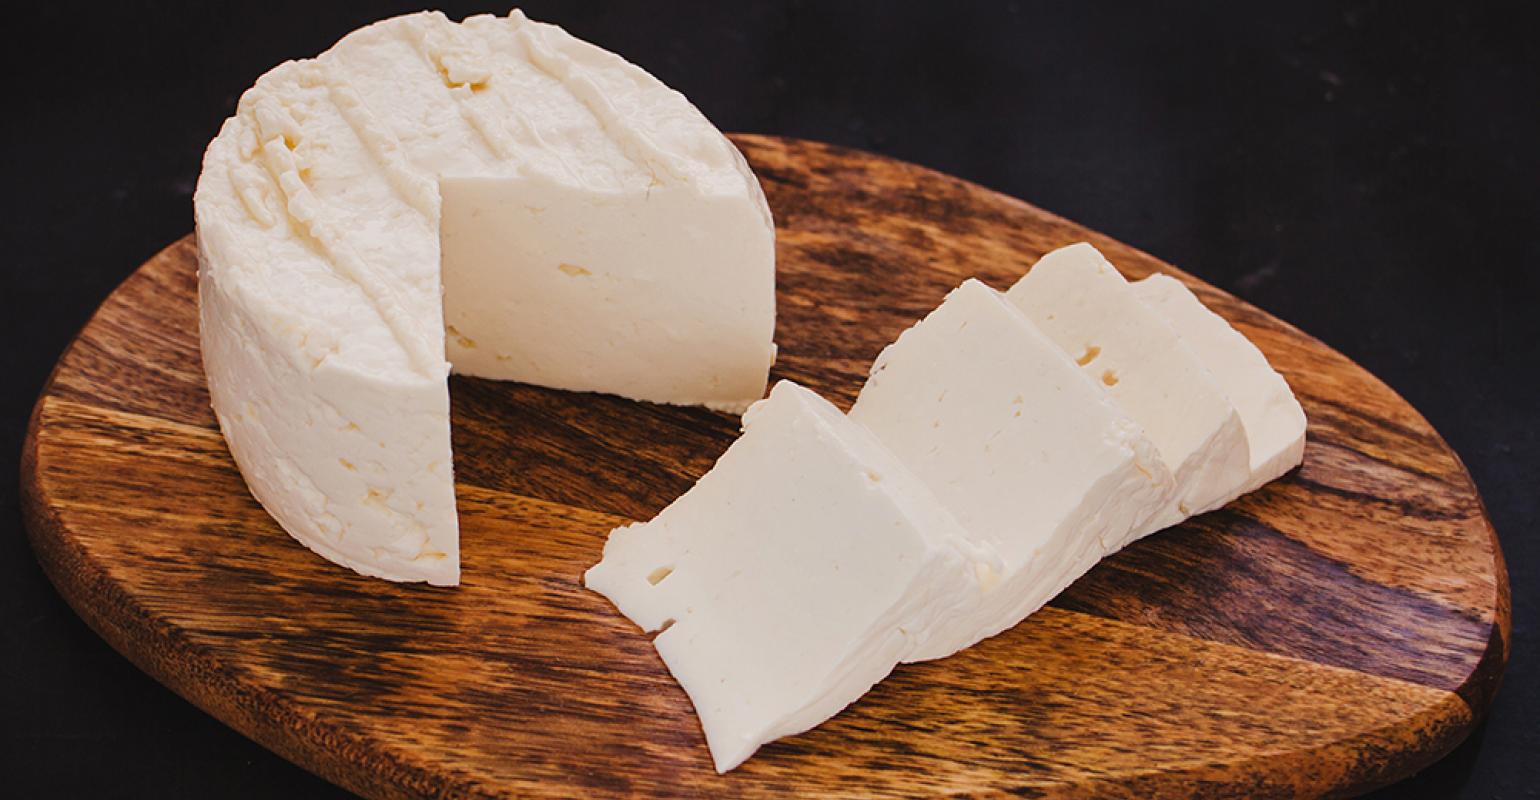 Flavor of the week: Queso Fresco, the classic Mexican cheese